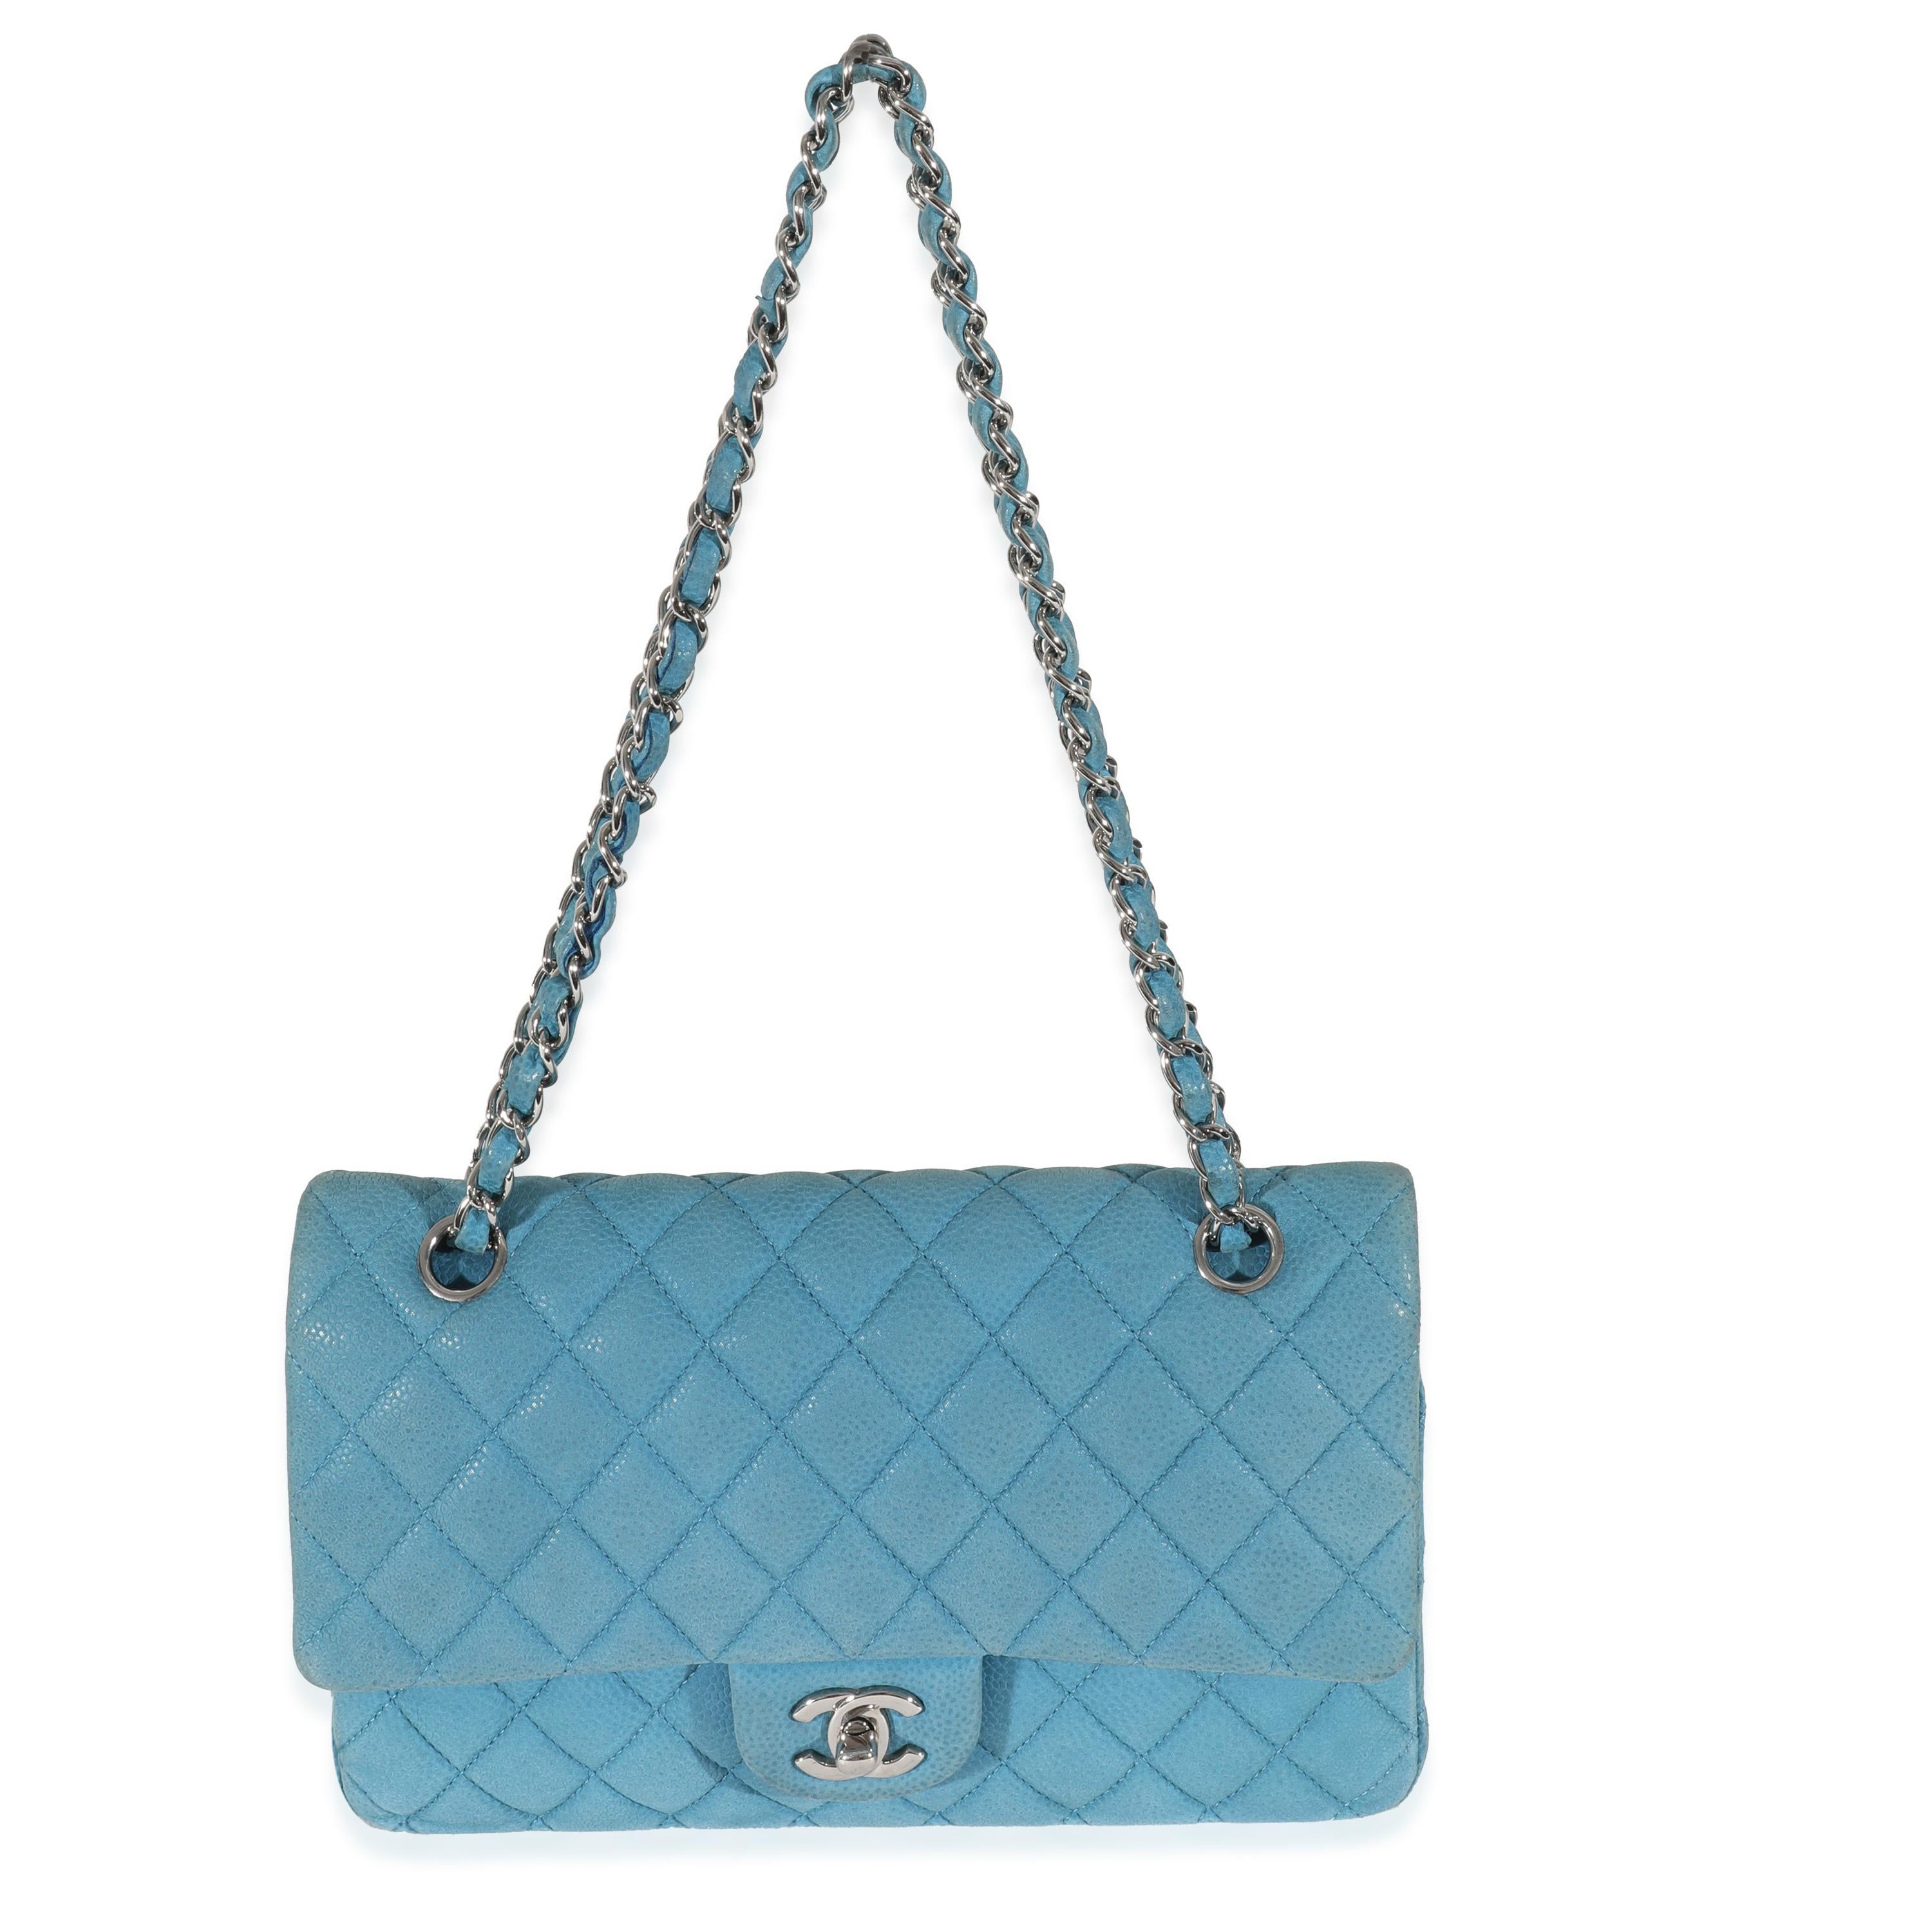 Listing Title: Chanel Blue Matte Caviar Medium Classic Double Flap Bag
SKU: 130867
Condition: Pre-owned 
Handbag Condition: Good
Condition Comments: Good Condition. Exterior corner scuffing and discoloration throughout. Scratching and tarnishing at